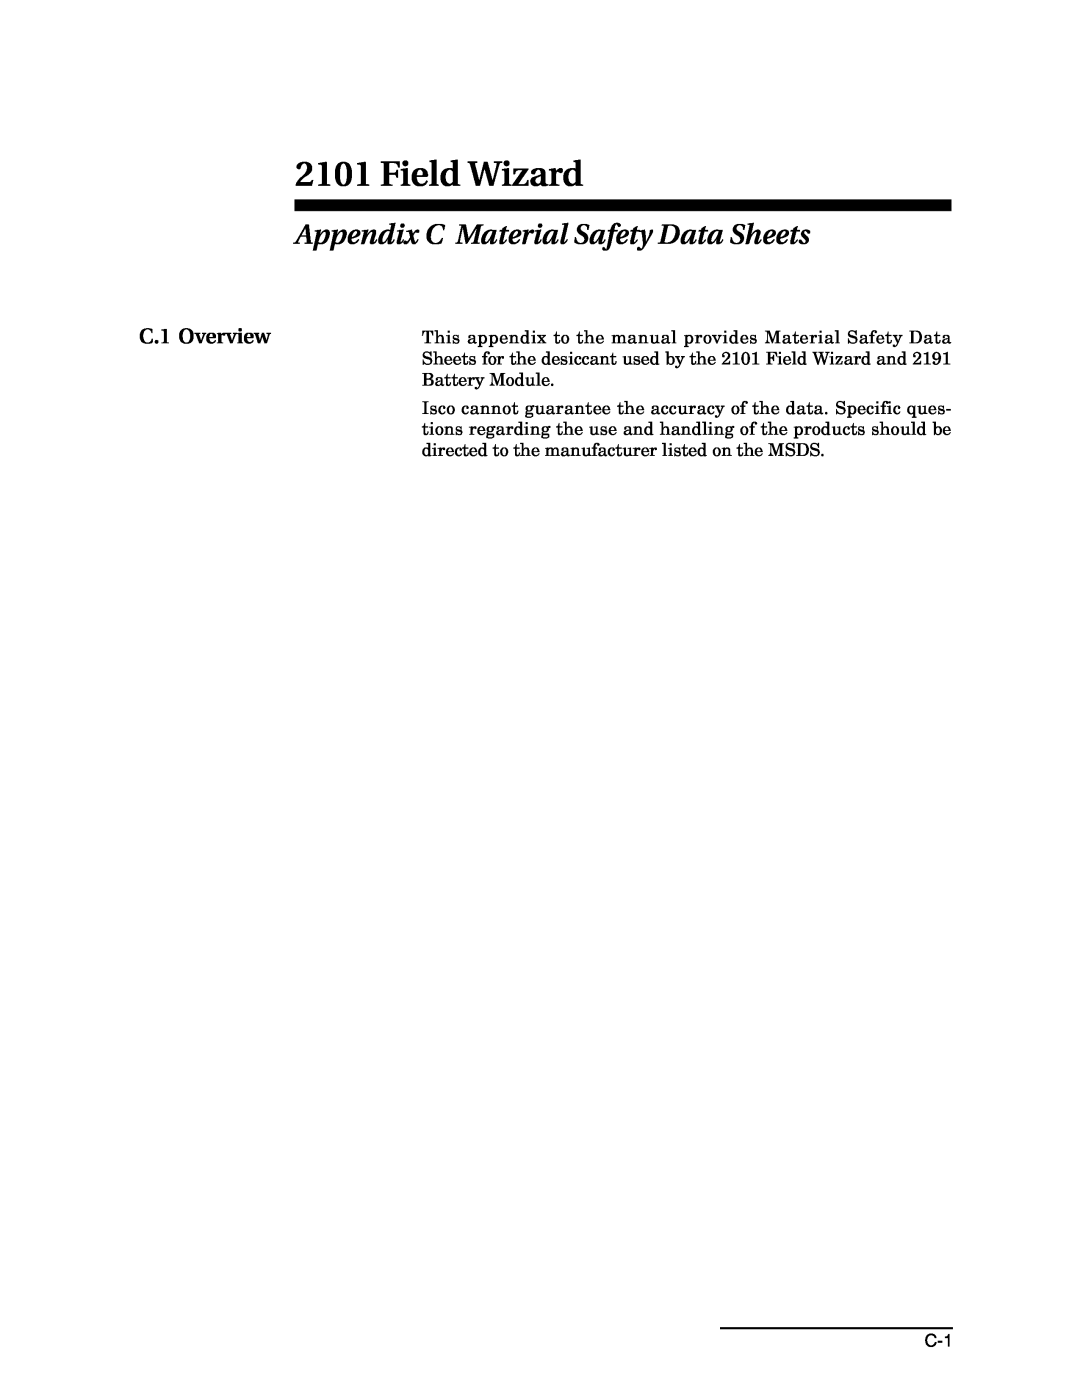 Teledyne 2101 installation and operation guide Appendix C Material Safety Data Sheets, C.1 Overview, Field Wizard 